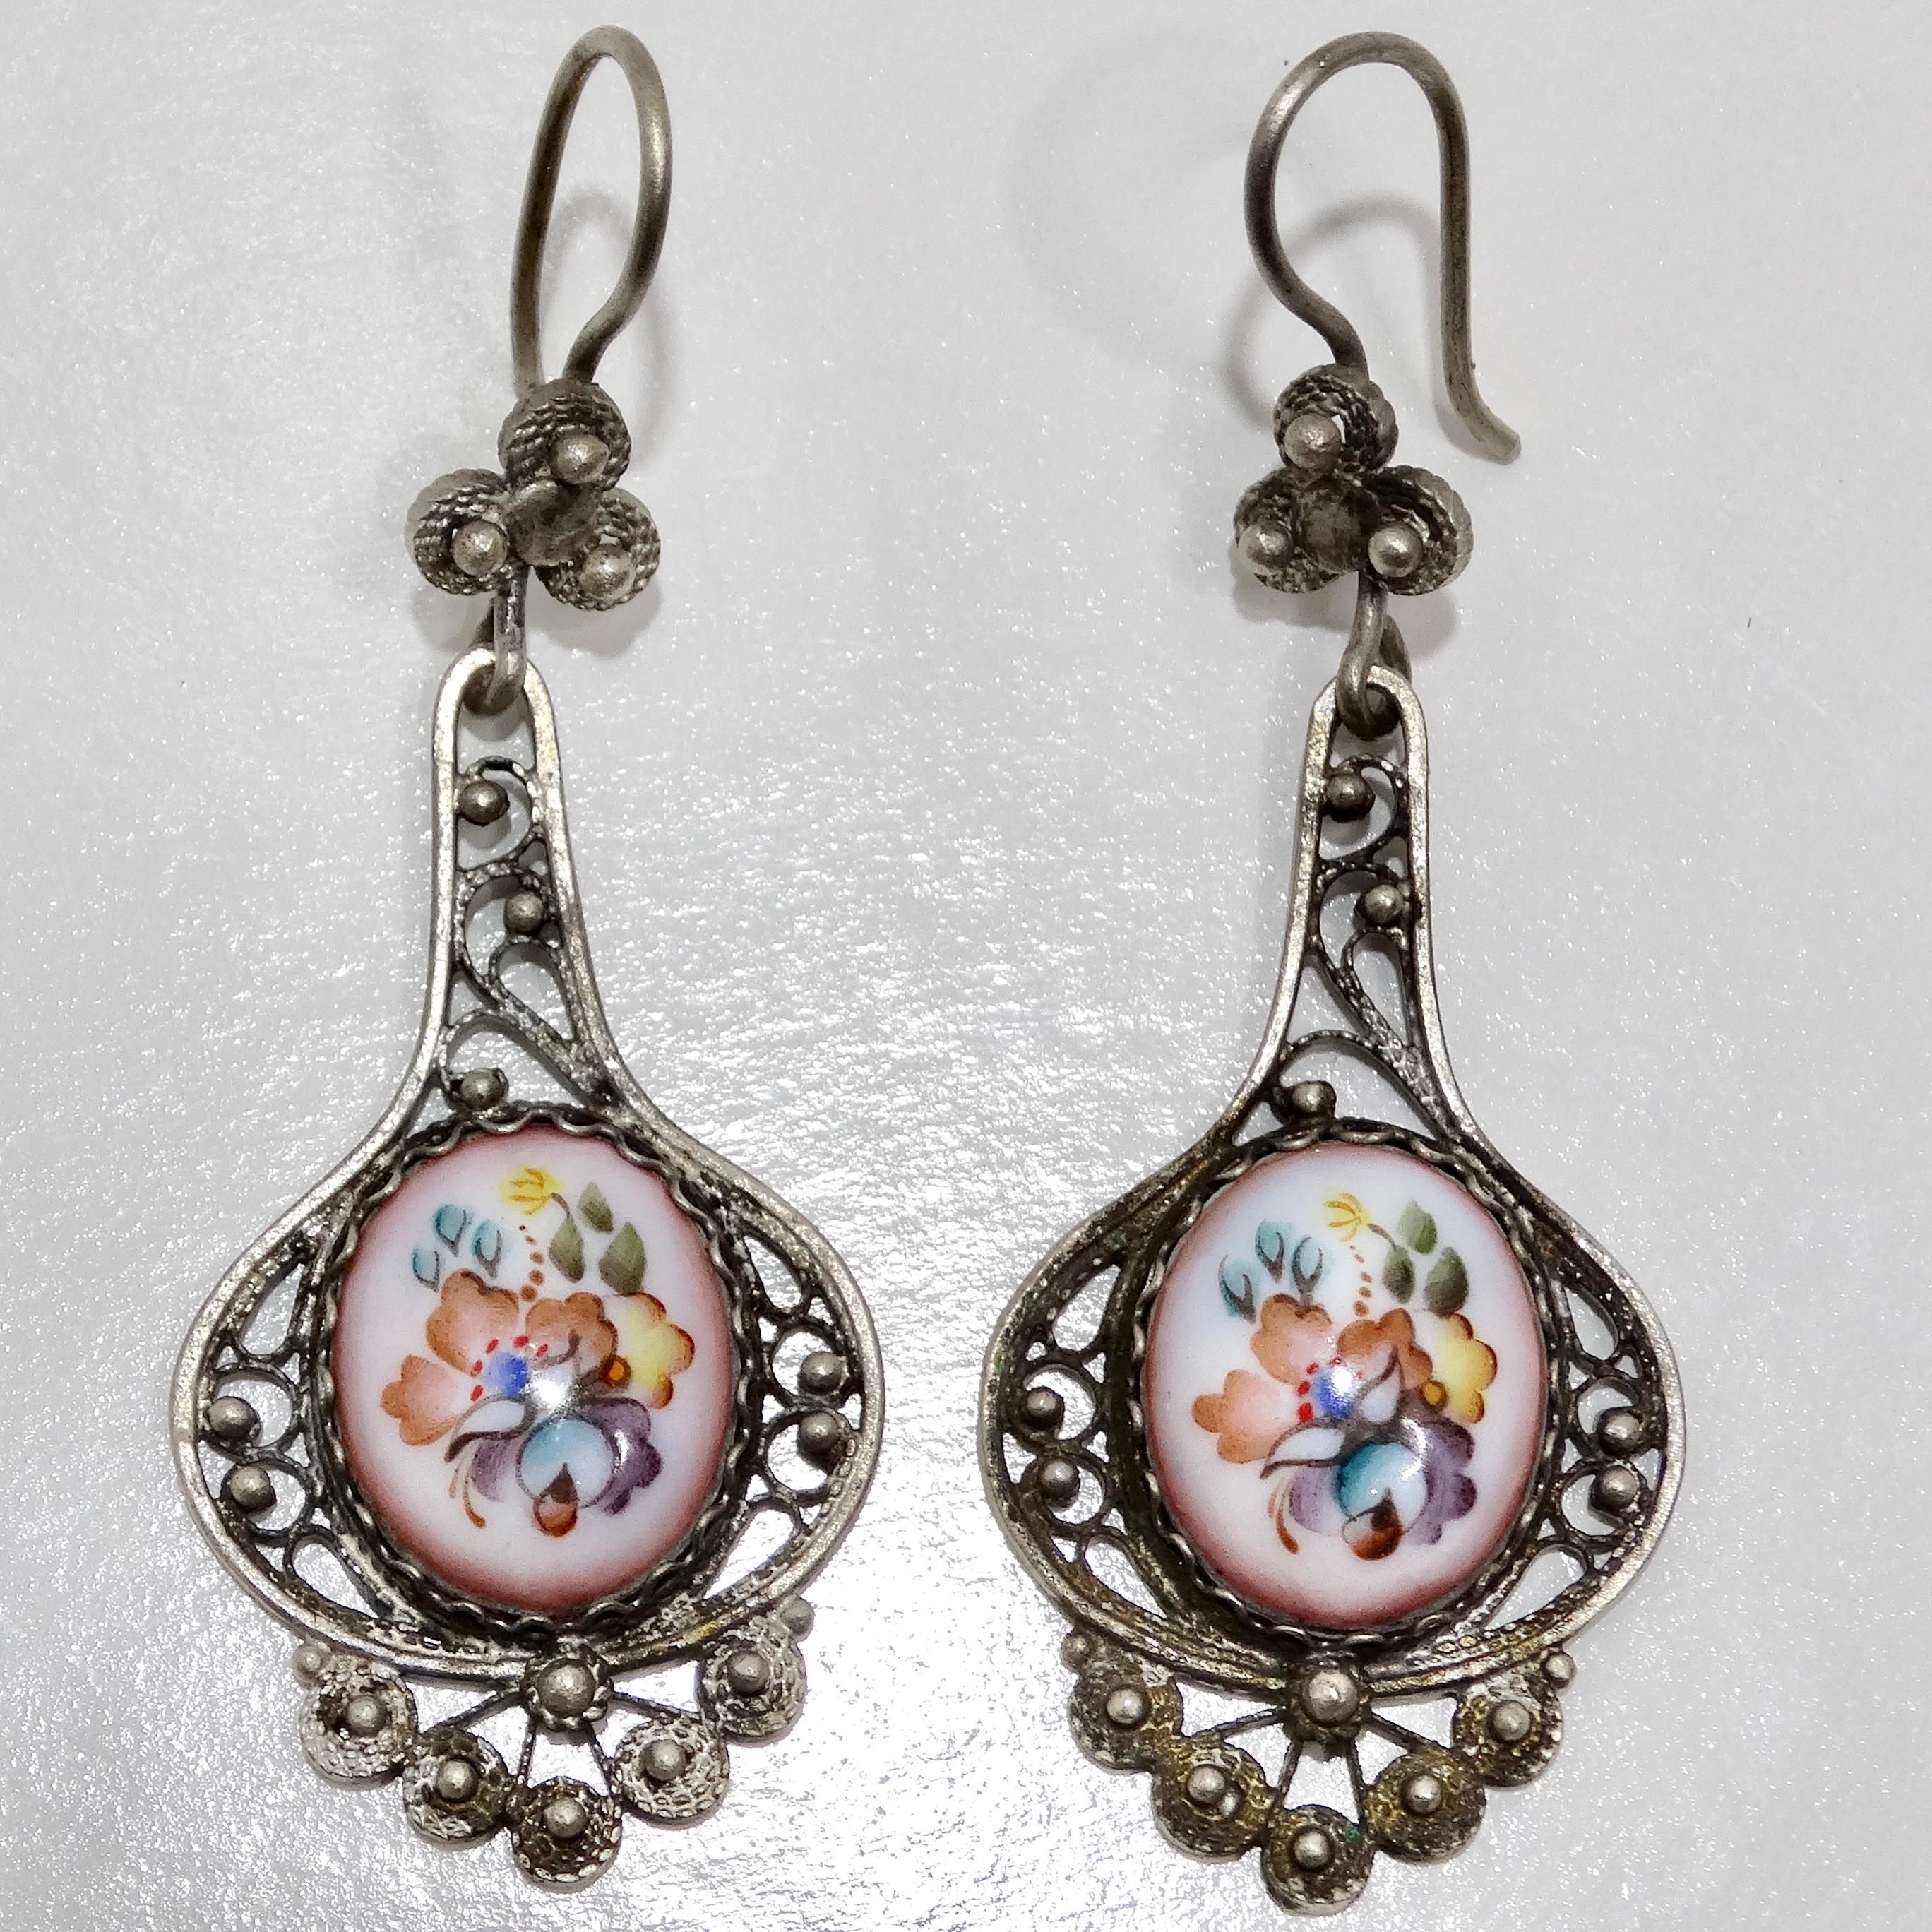 Experience the timeless charm of the Antique Victorian Floral Porcelain Dangle Earrings, a beautiful pair of earrings that encapsulates the elegance and artistry of a bygone era. These exquisite 1940s silver dangle earrings feature delicate